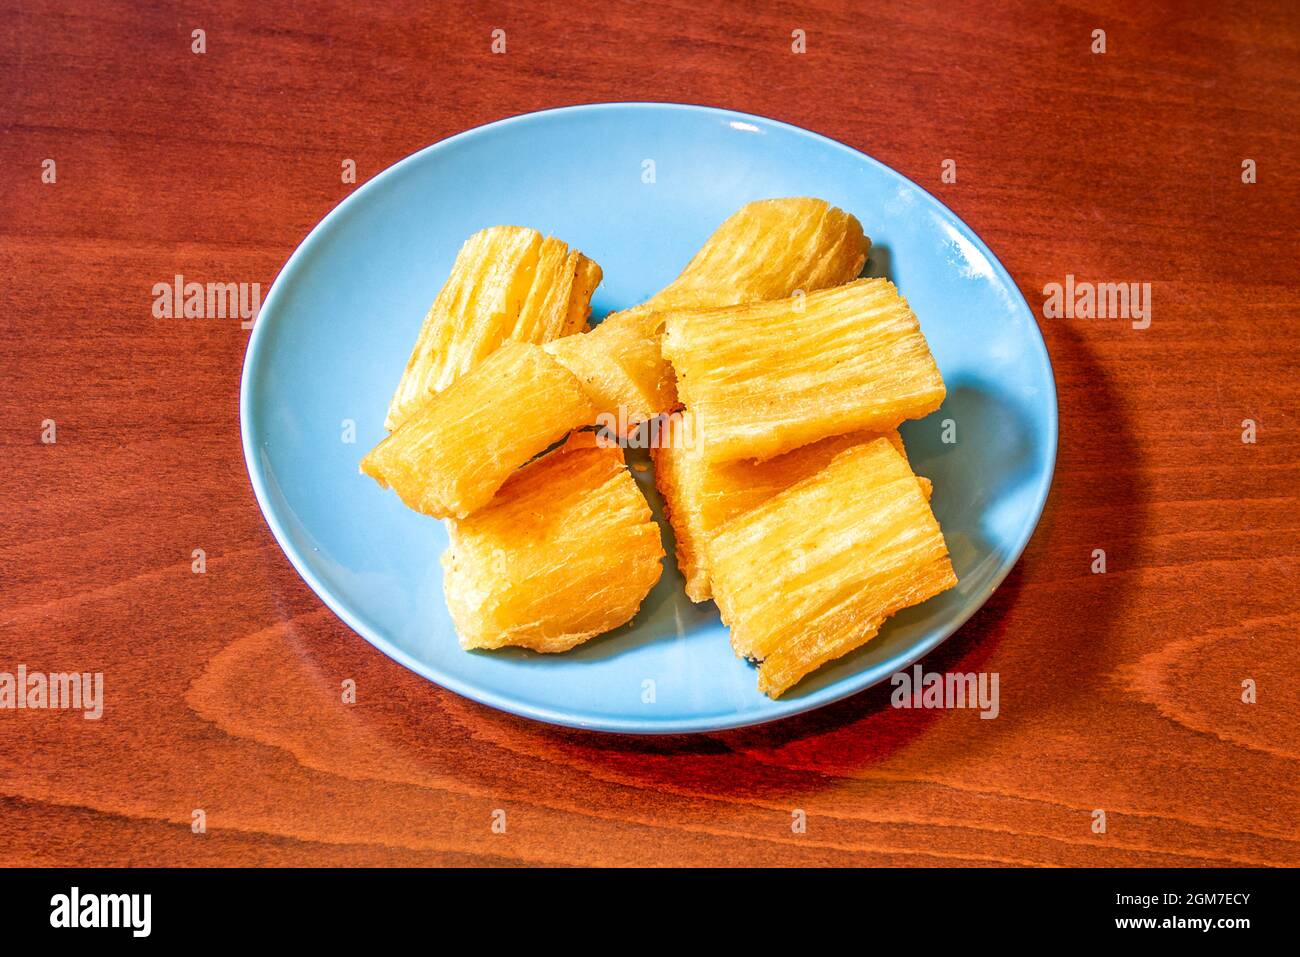 Pieces of tasty Caribbean cassava cooked and then fried in olive oil on a blue plate Stock Photo